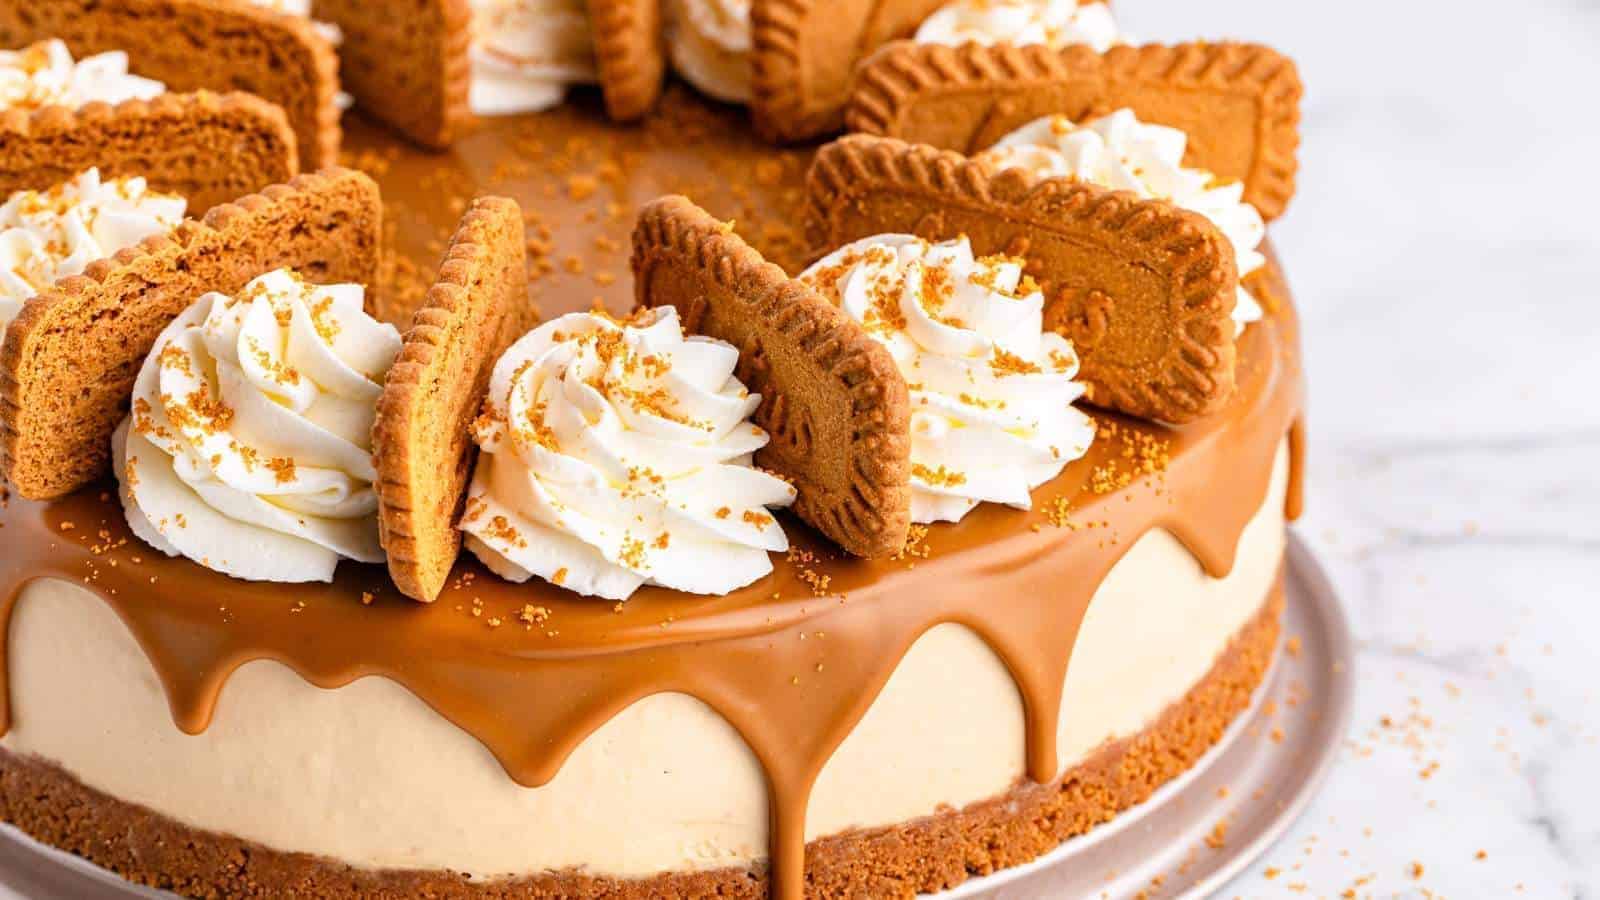 Biscoff cheesecake with whipped cream and cookies.